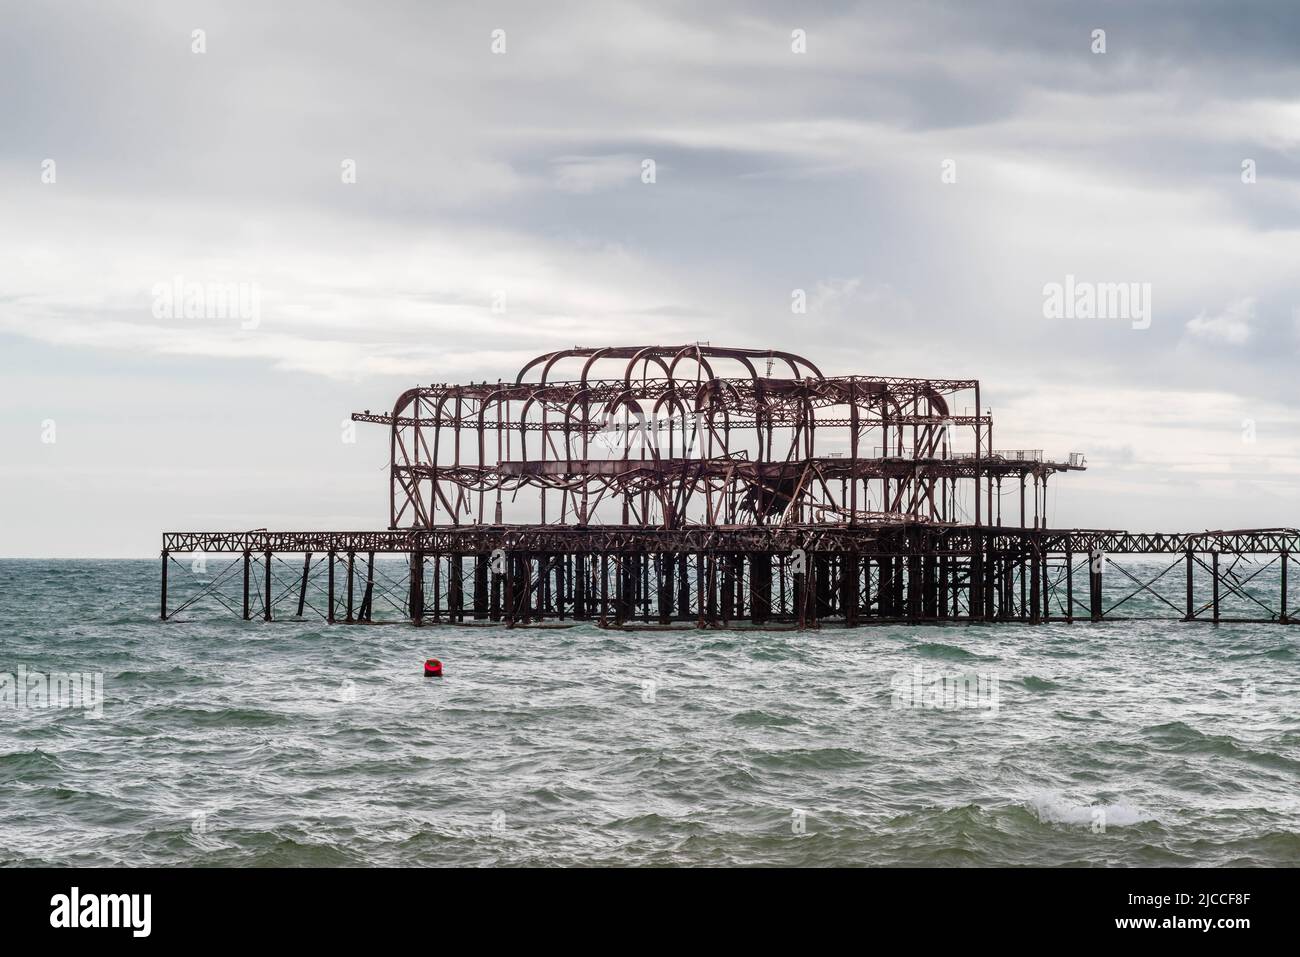 The remains of West Pier in Brighton during stormy weather, Brighton beach, East Sussex, England, UK Stock Photo